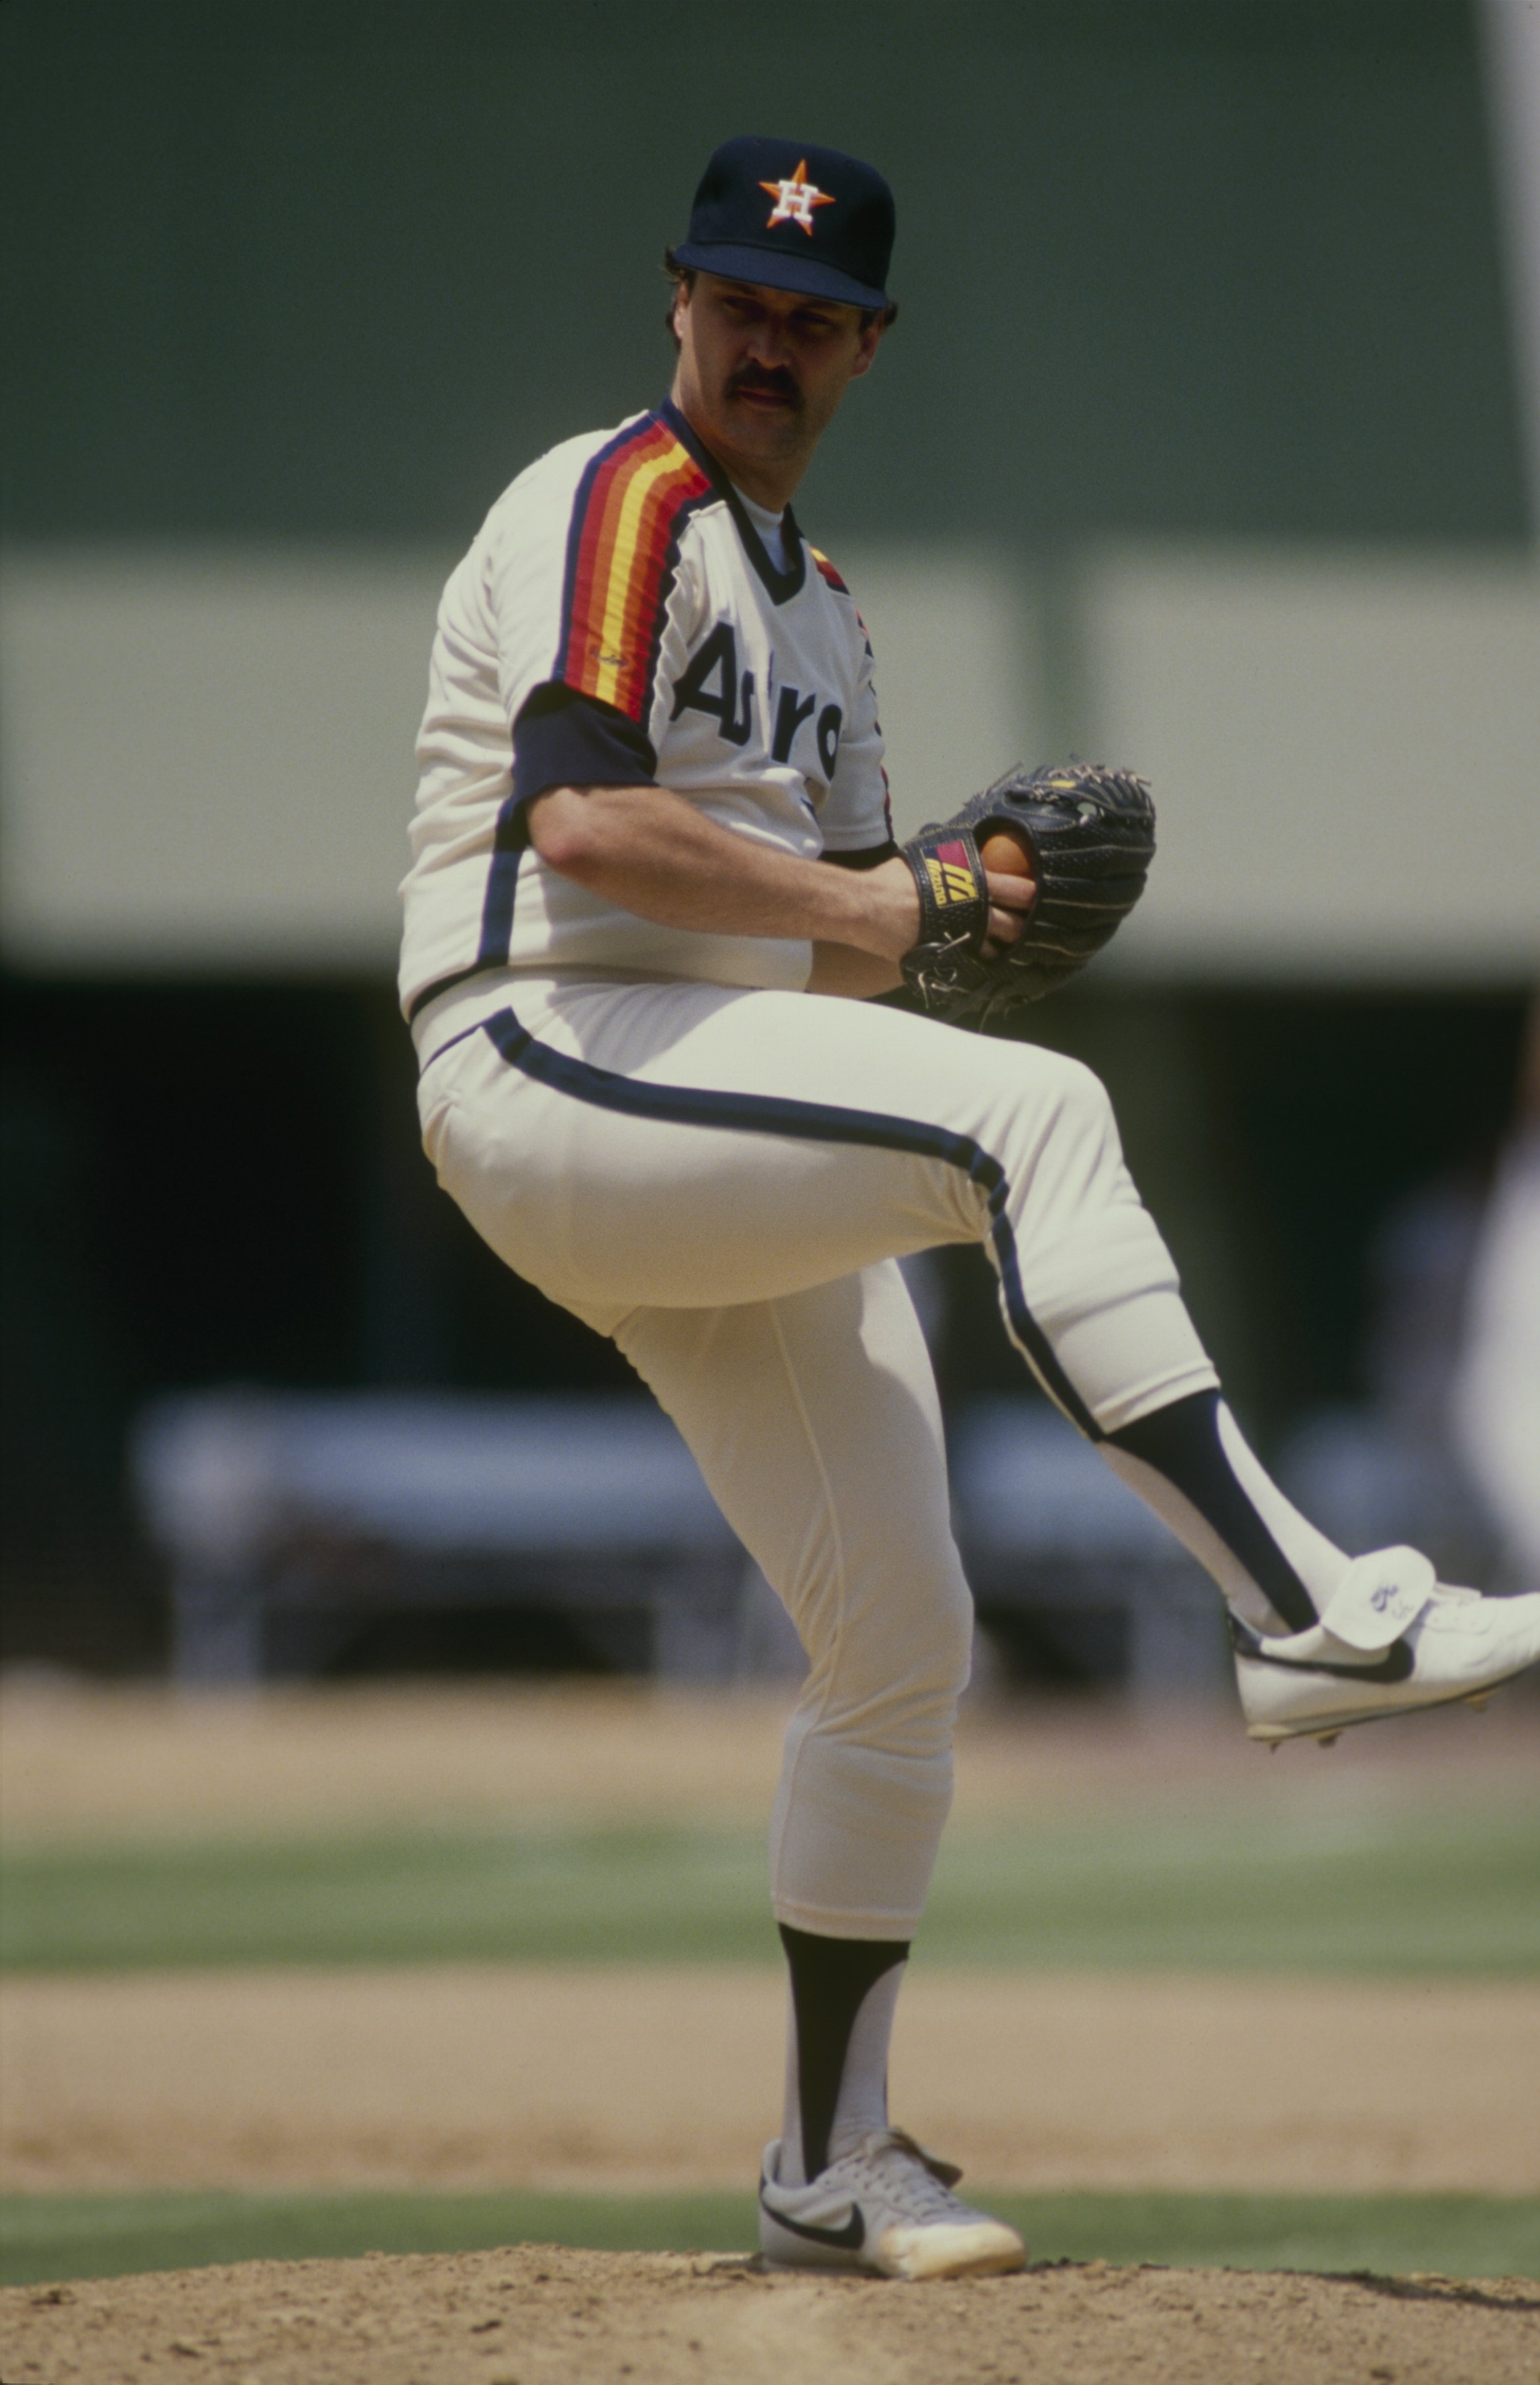 Nolan Ryan and the Top 15 Starting Pitchers in the History of the